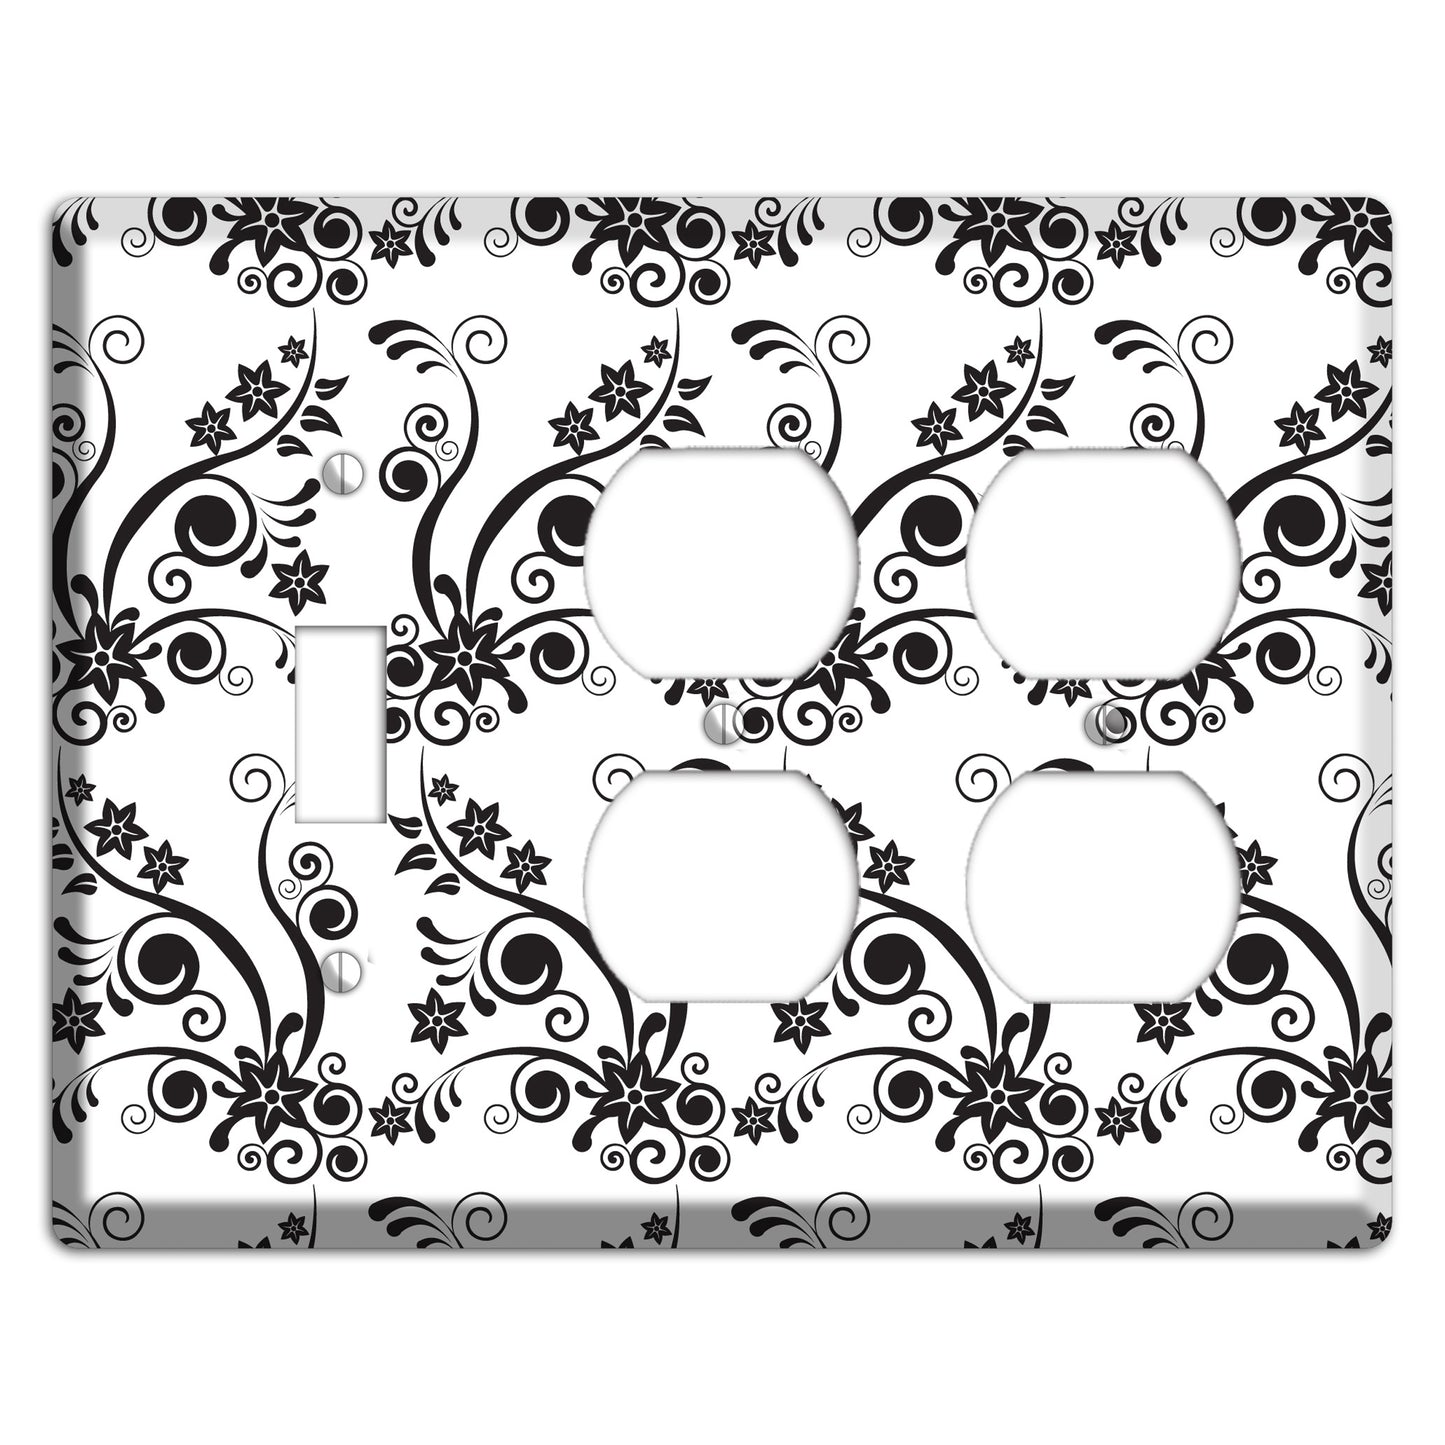 Scrolled Floral Toile Toggle / 2 Duplex Wallplate